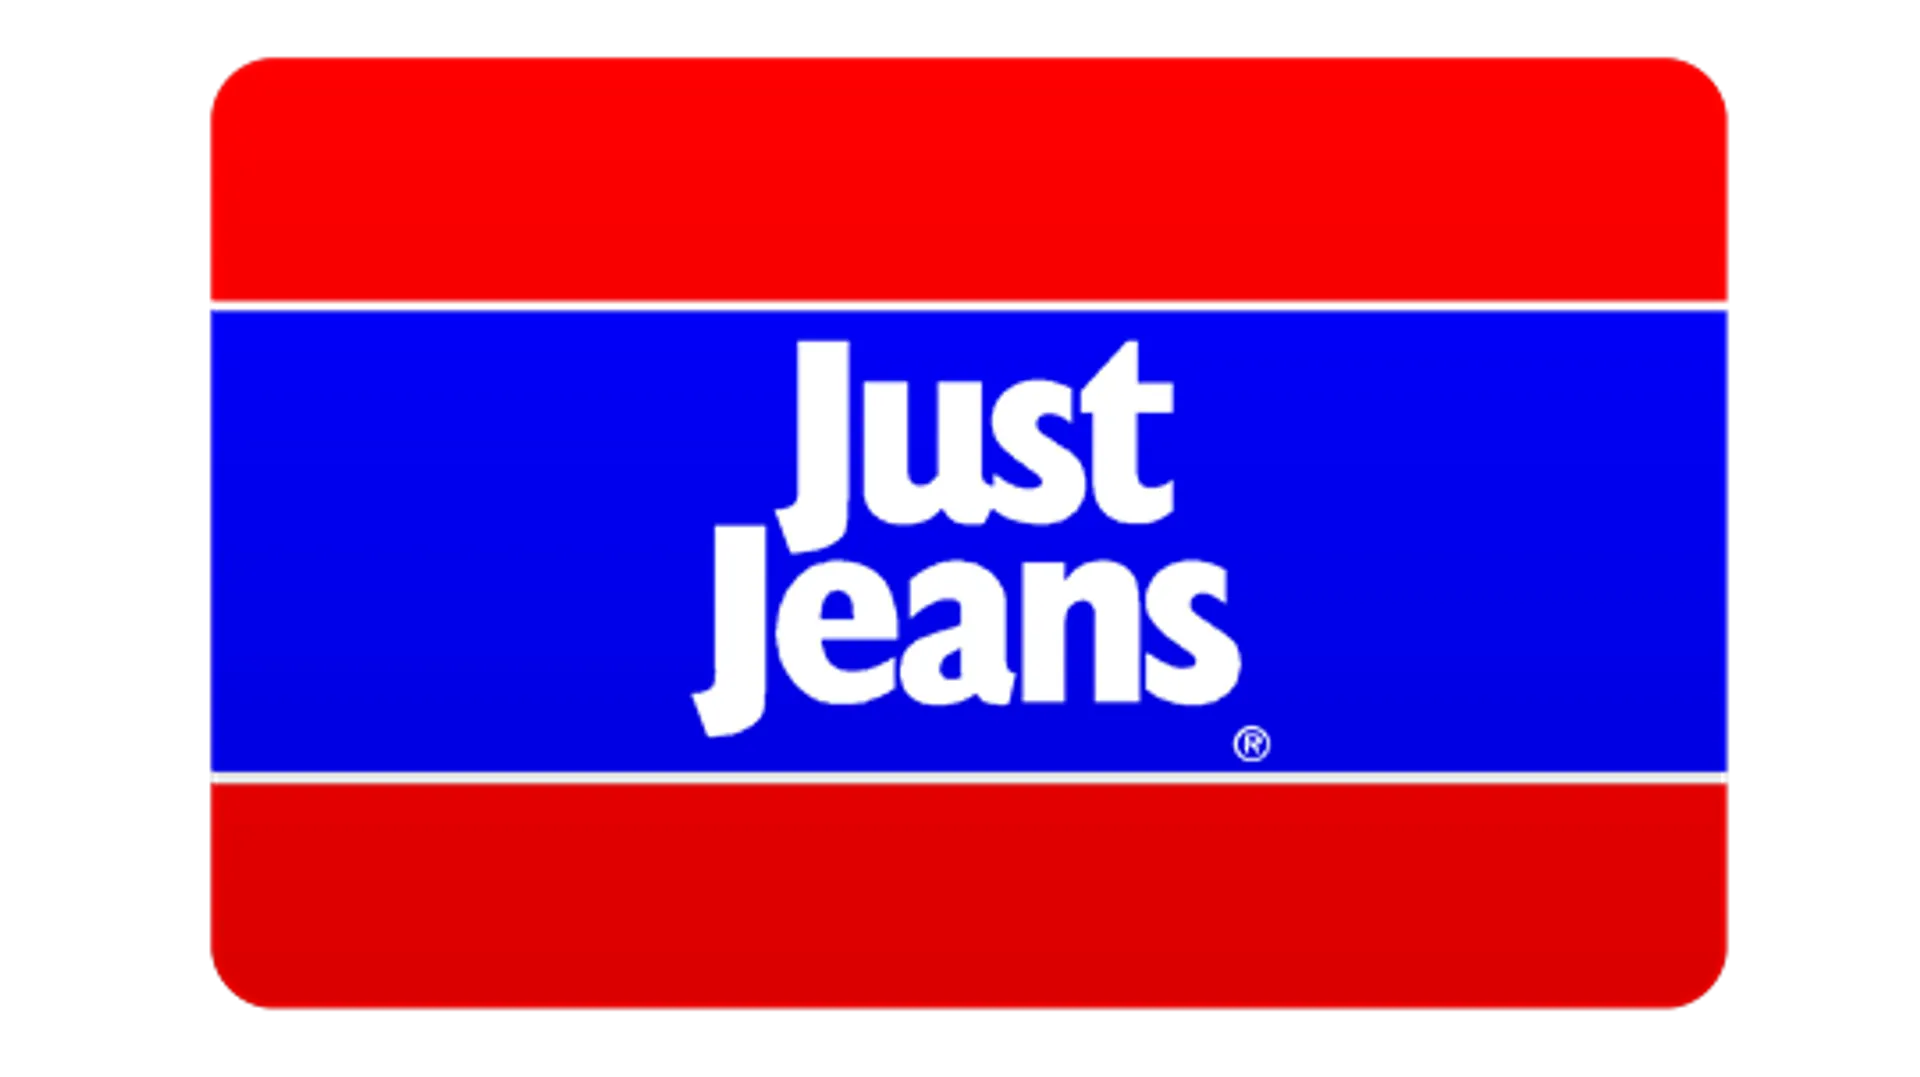 JUST JEANS logo. Current weekly ad